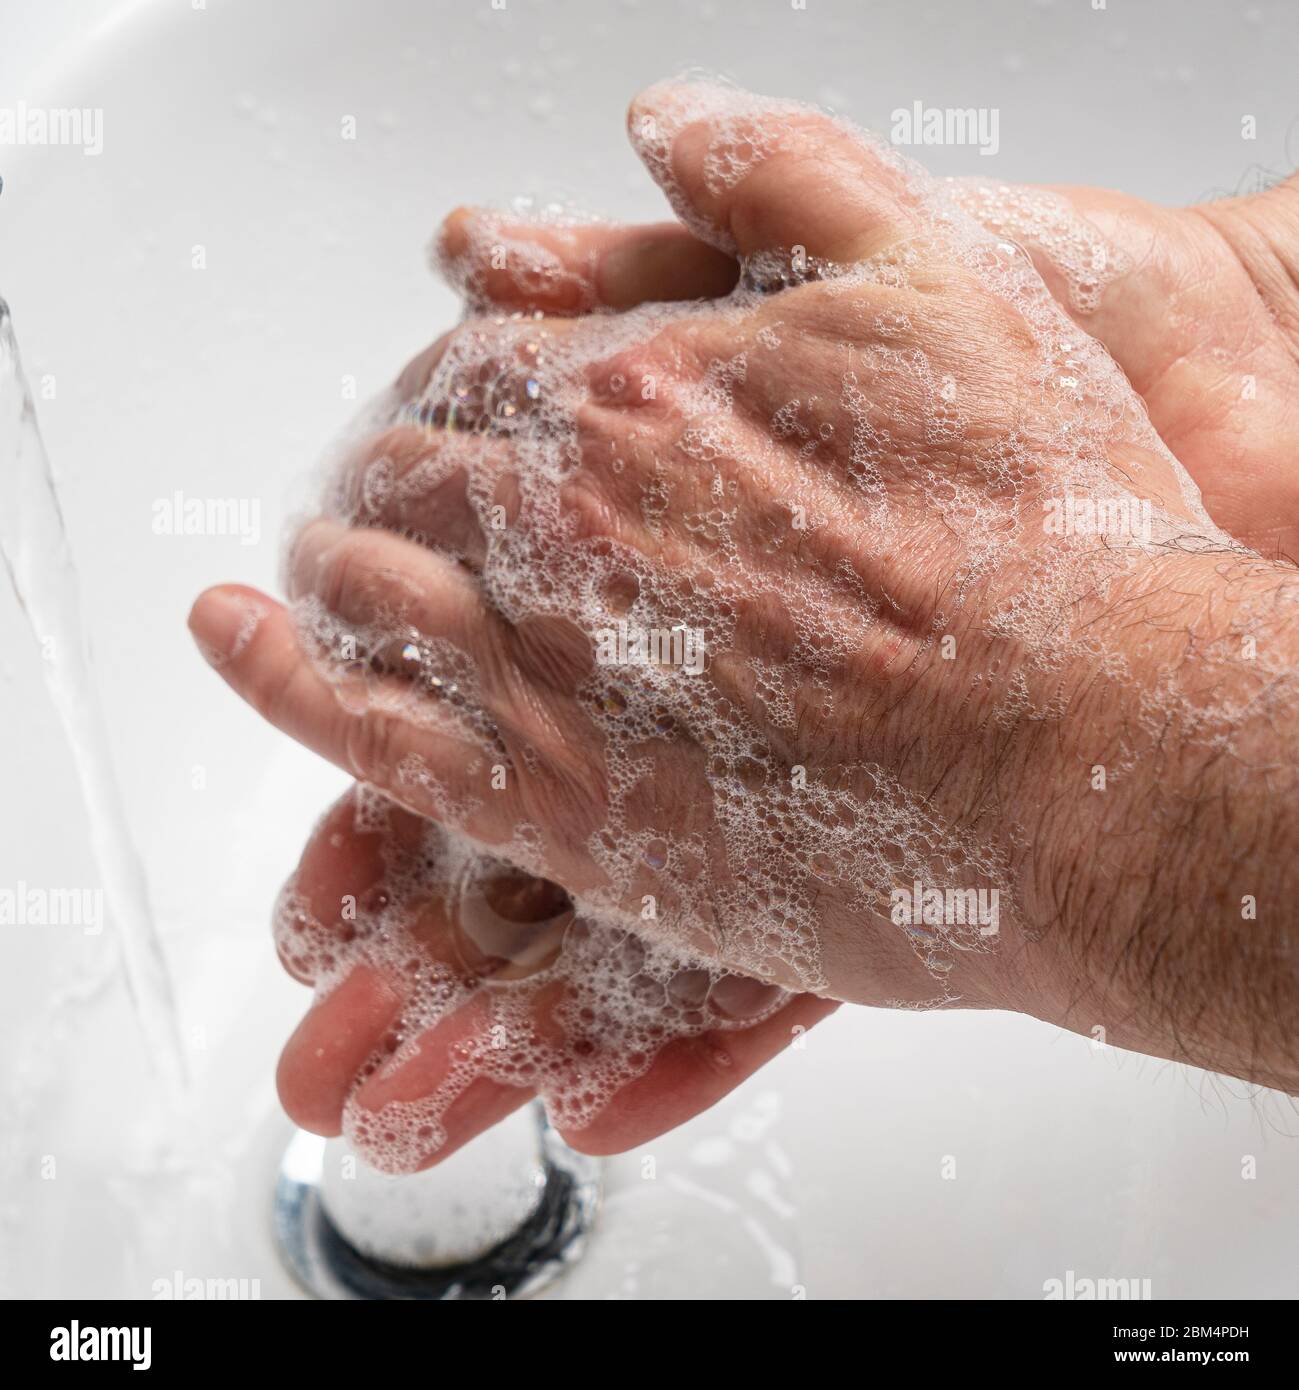 wash your hands with soap in Covid-19 times Stock Photo